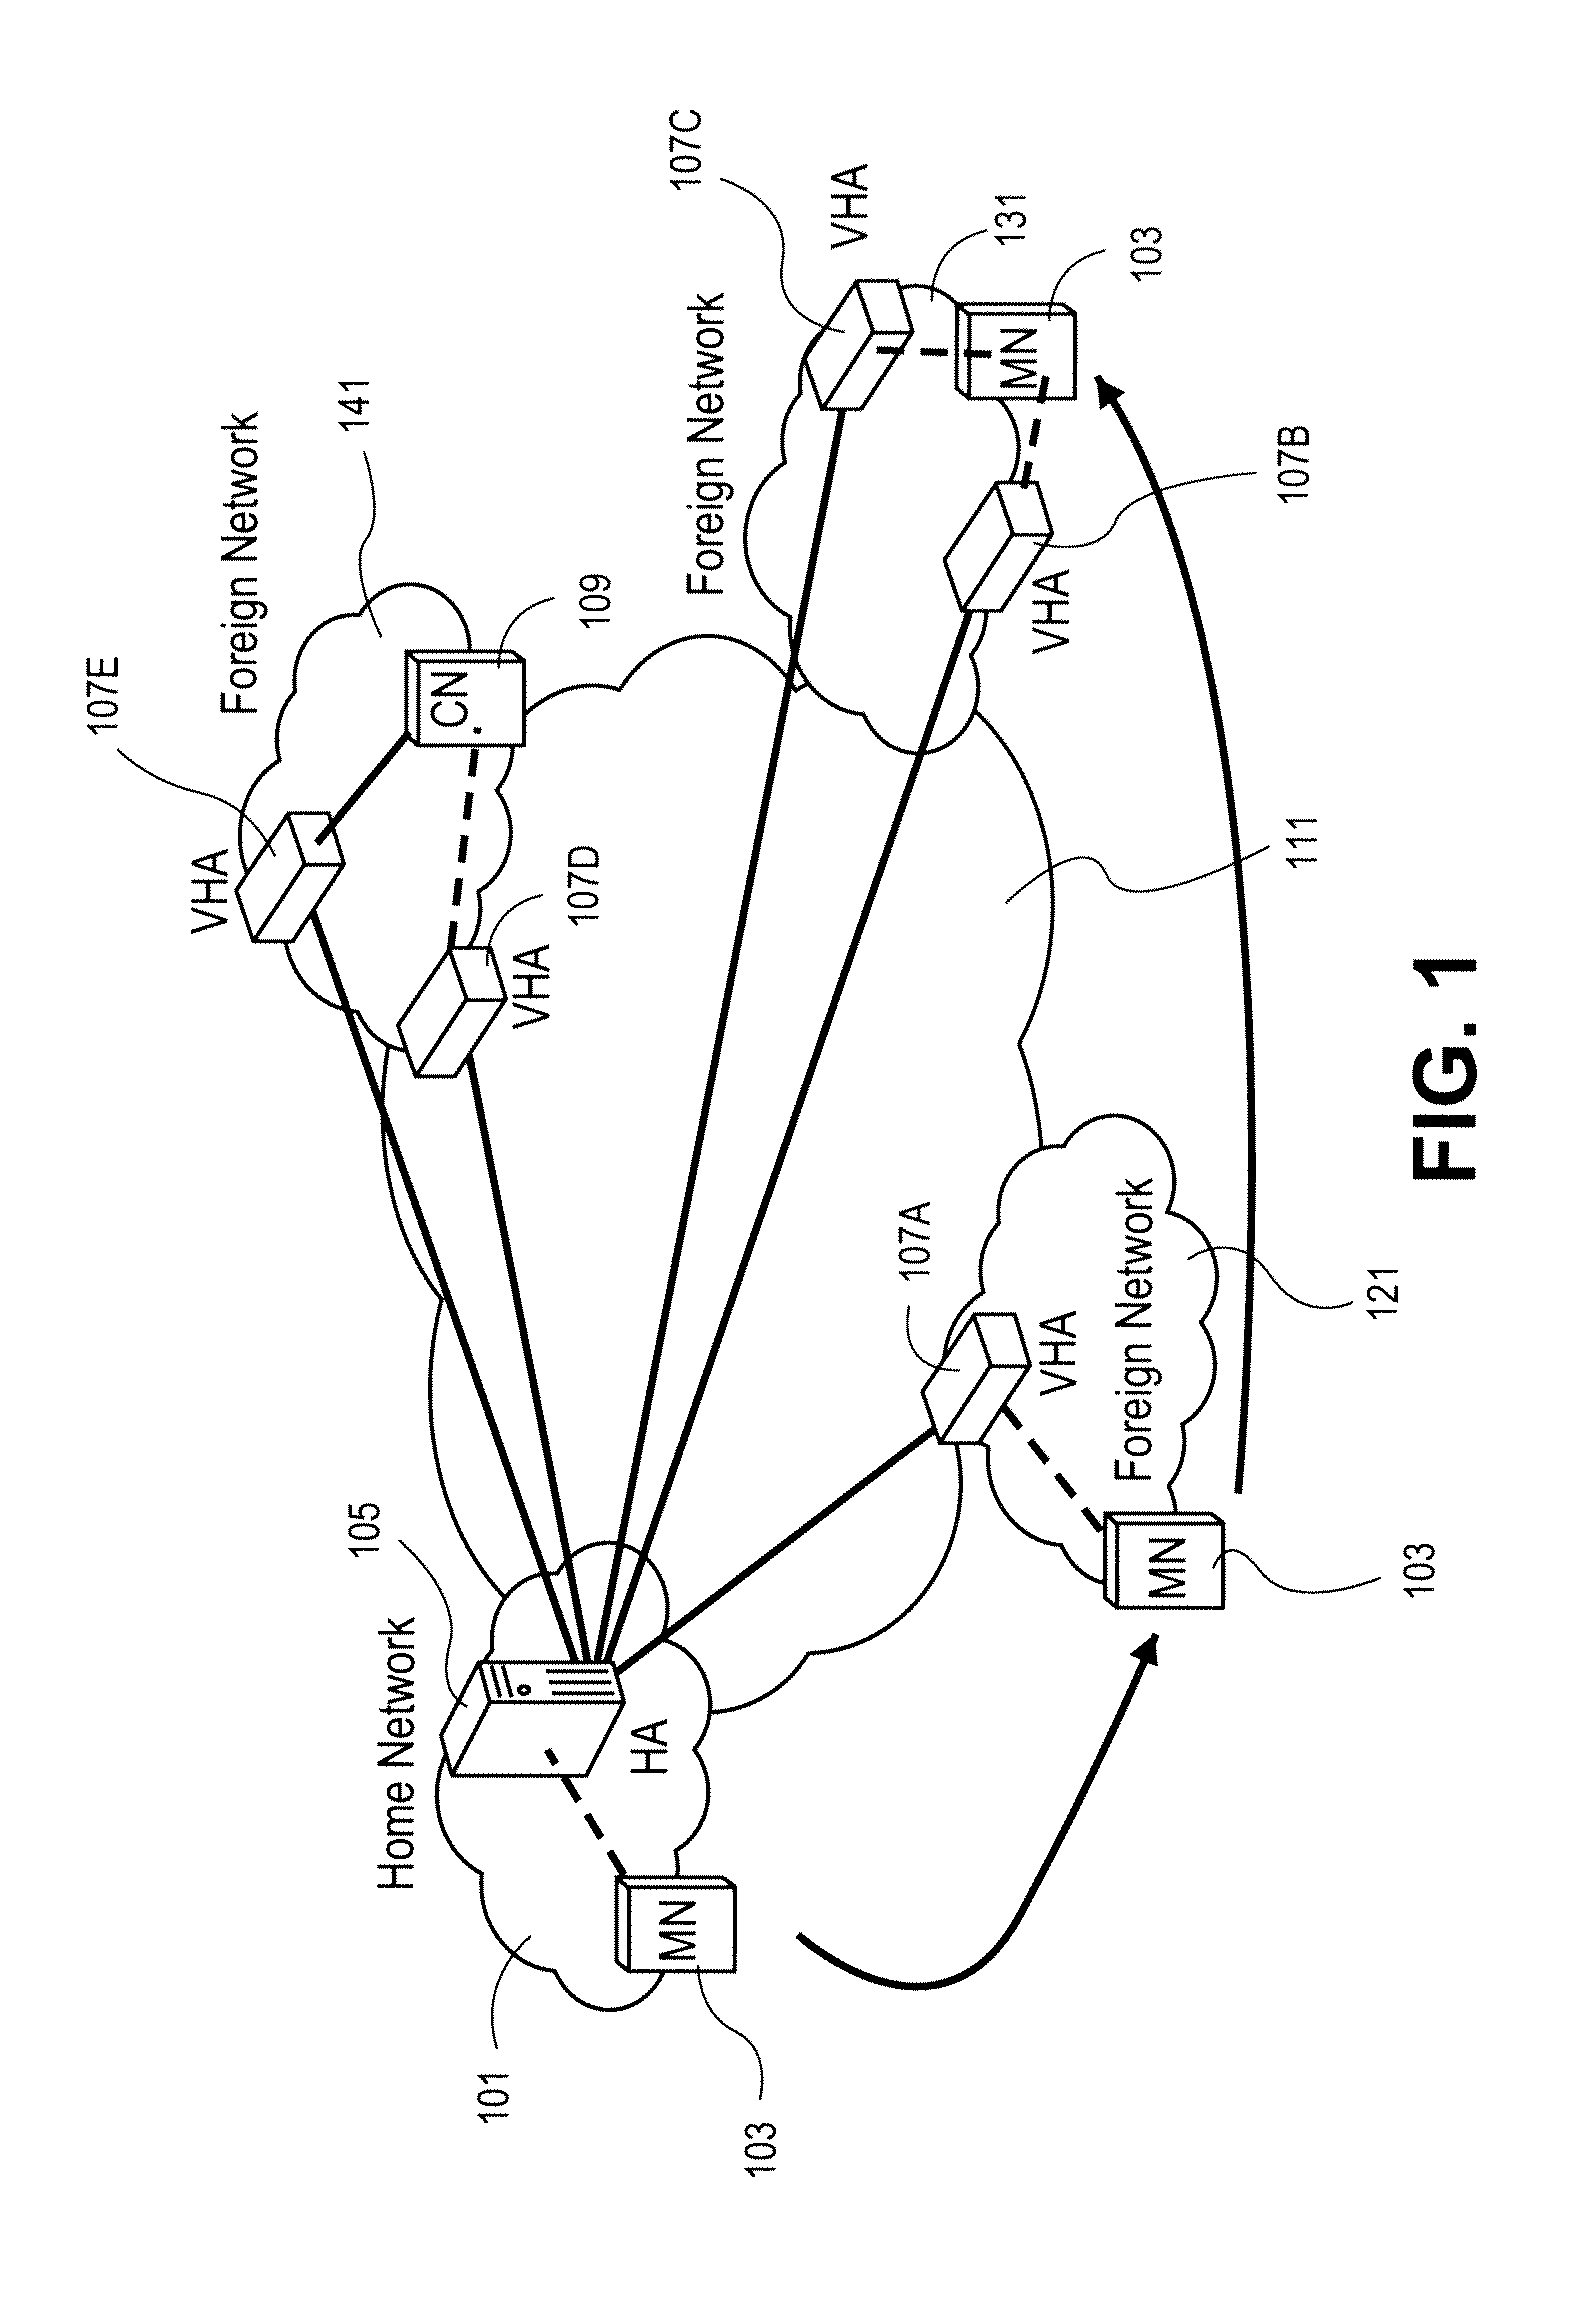 System and Method for Providing Mobility with a Split Home Agent Architecture